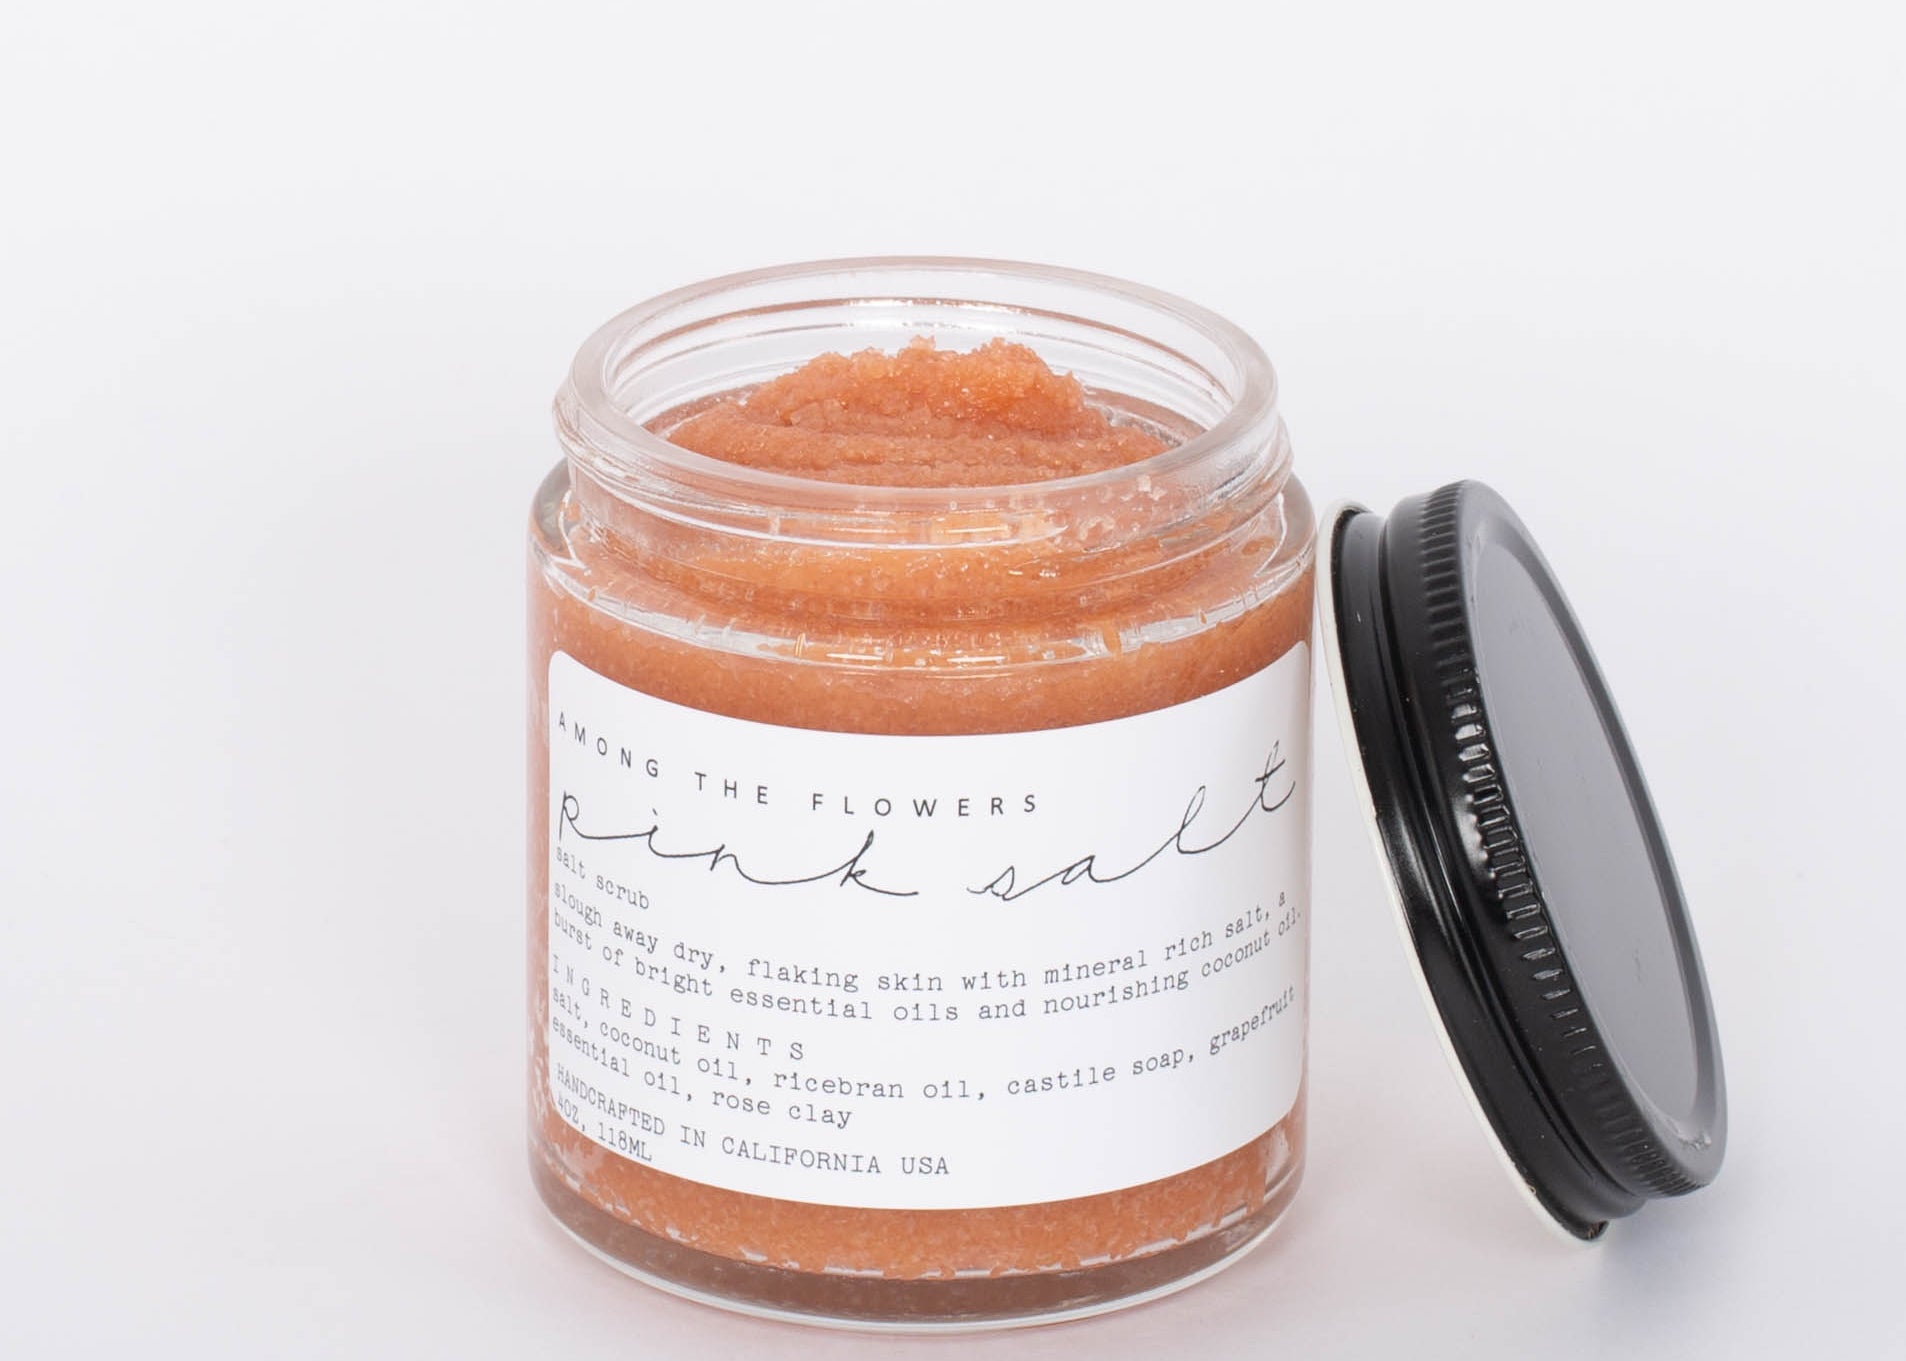 Pink Salt Moisturizing Whipped Salt Scrub. A whipped salt, coconut oil, and castile soap scrub infused with essential oils and botanical extracts for absorption and added nutrients. Our soap base cleans while rich coconut oil moisturizes, and salt sloughs away dead skin.